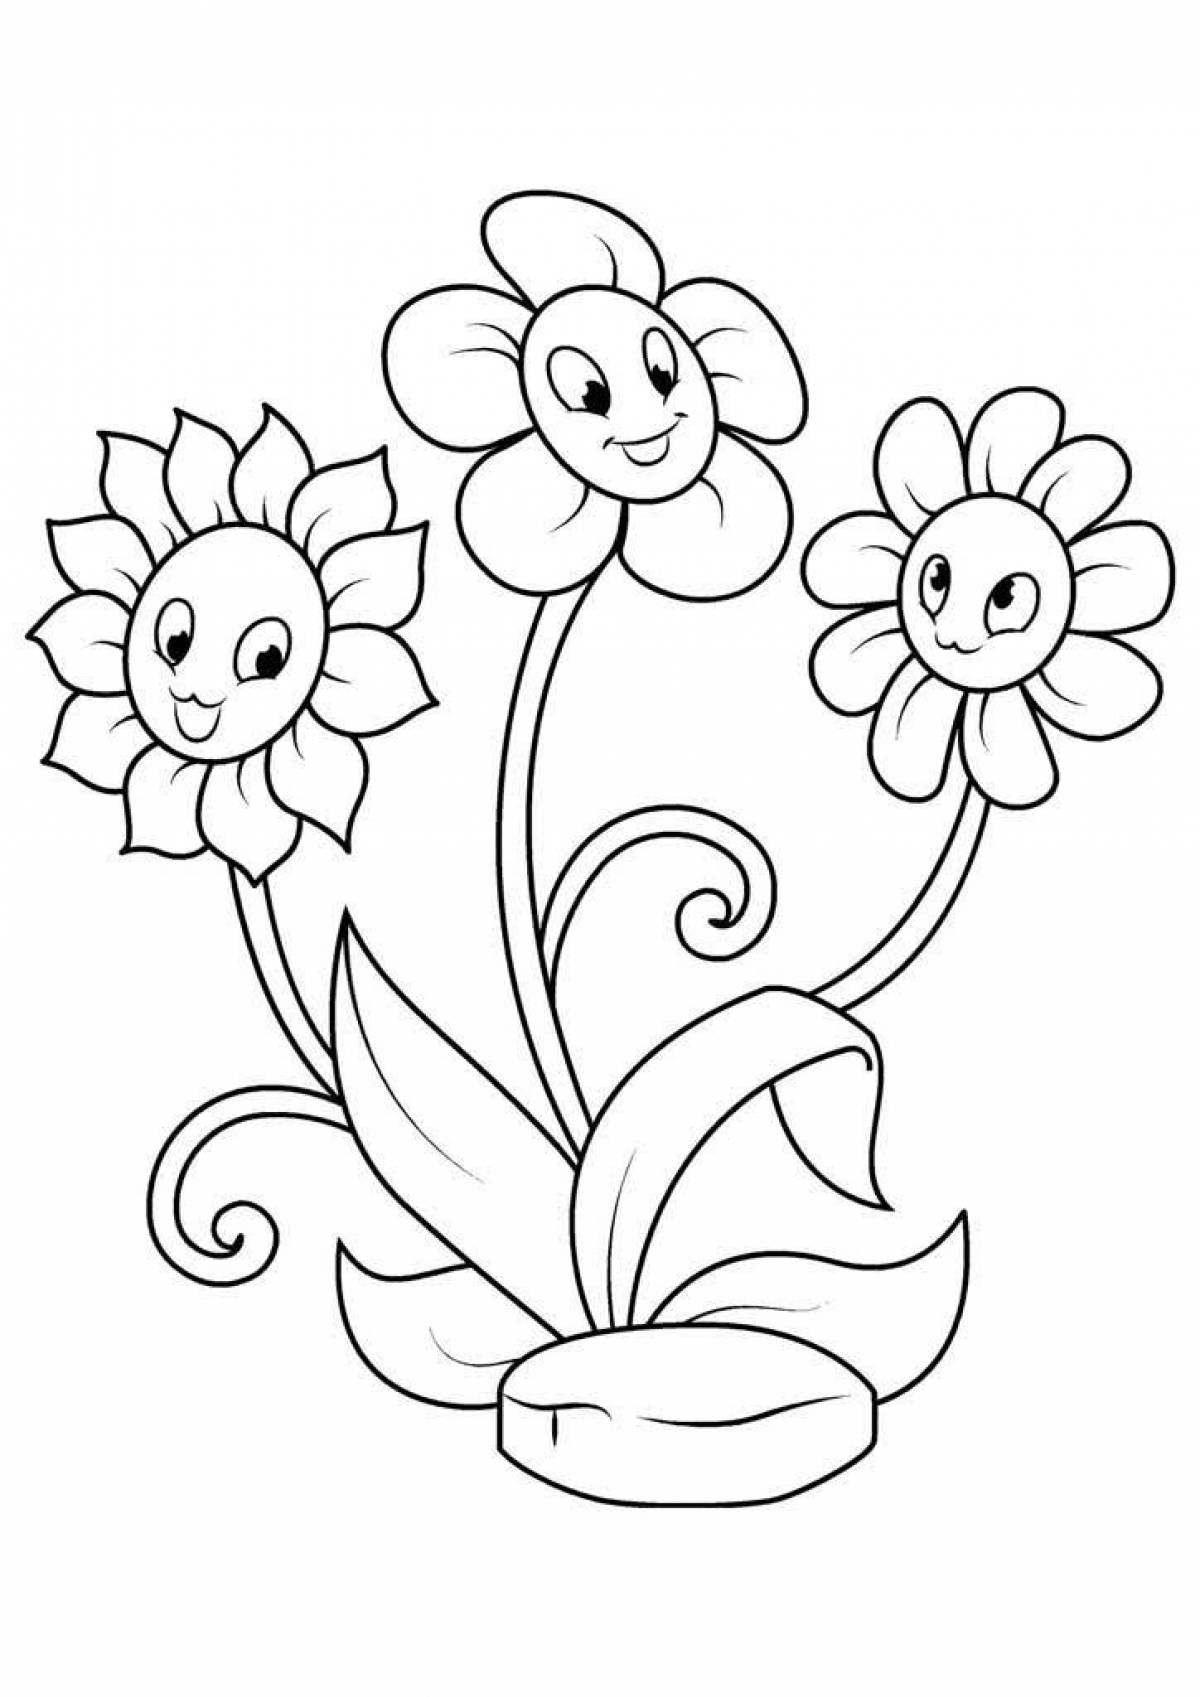 Playful flowers coloring